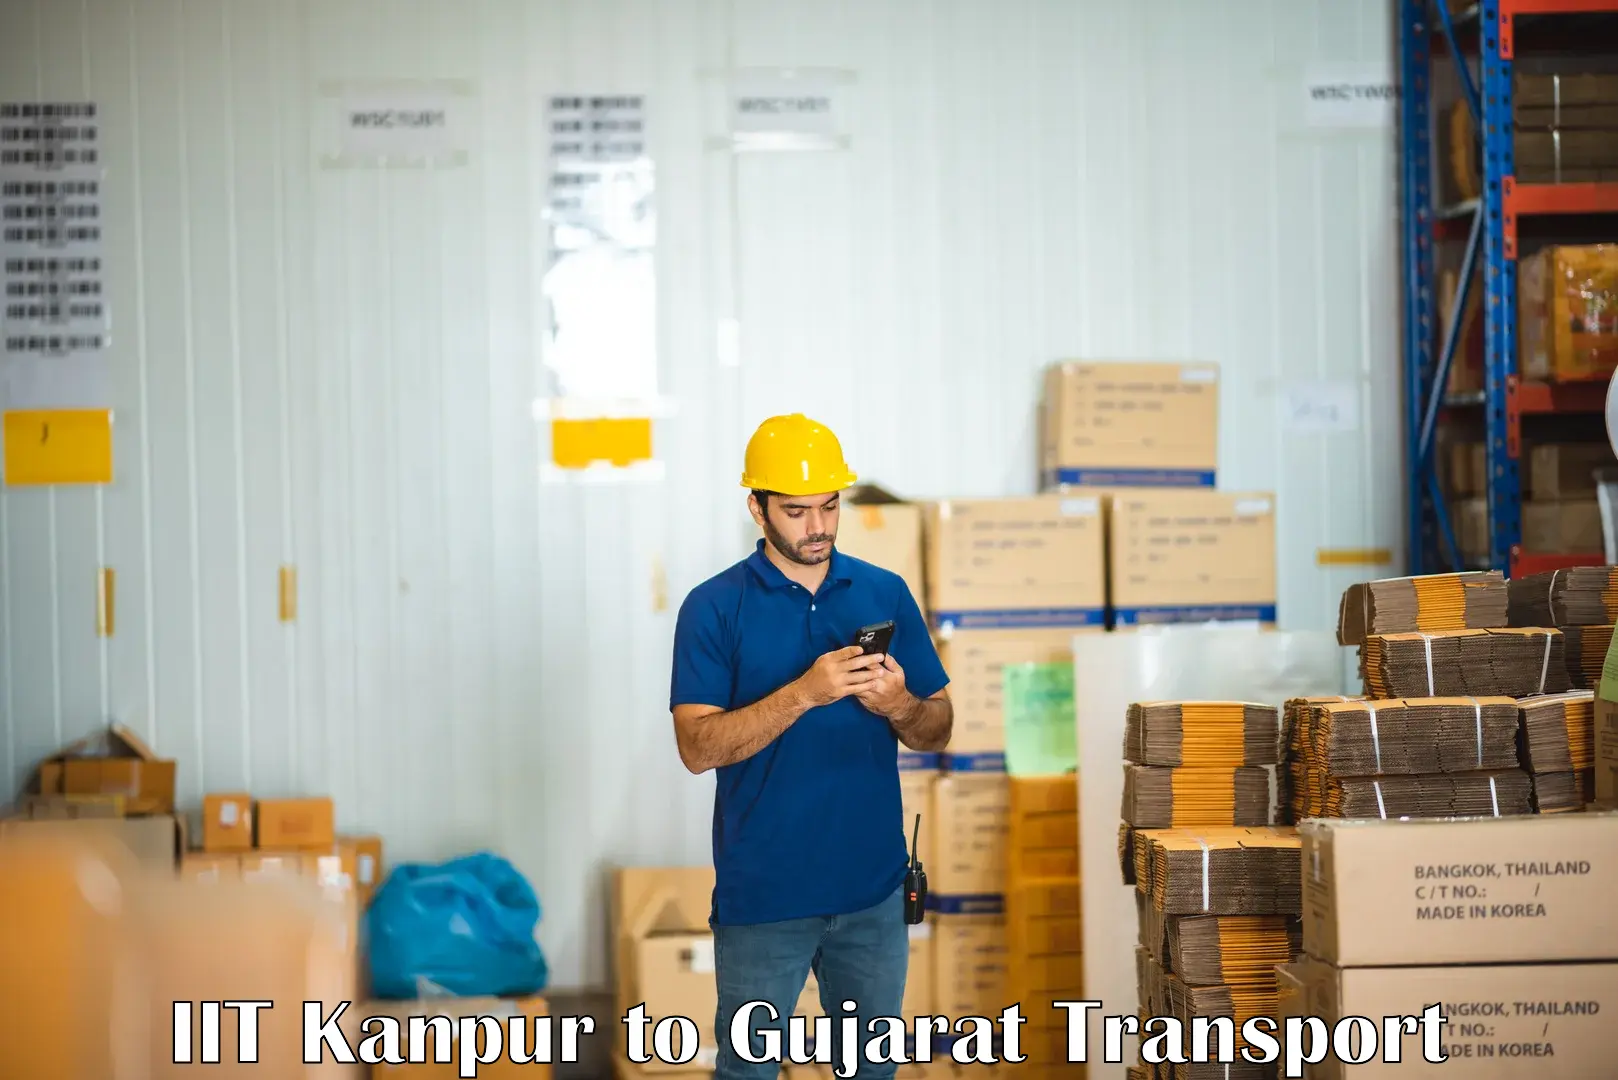 Commercial transport service IIT Kanpur to Surat